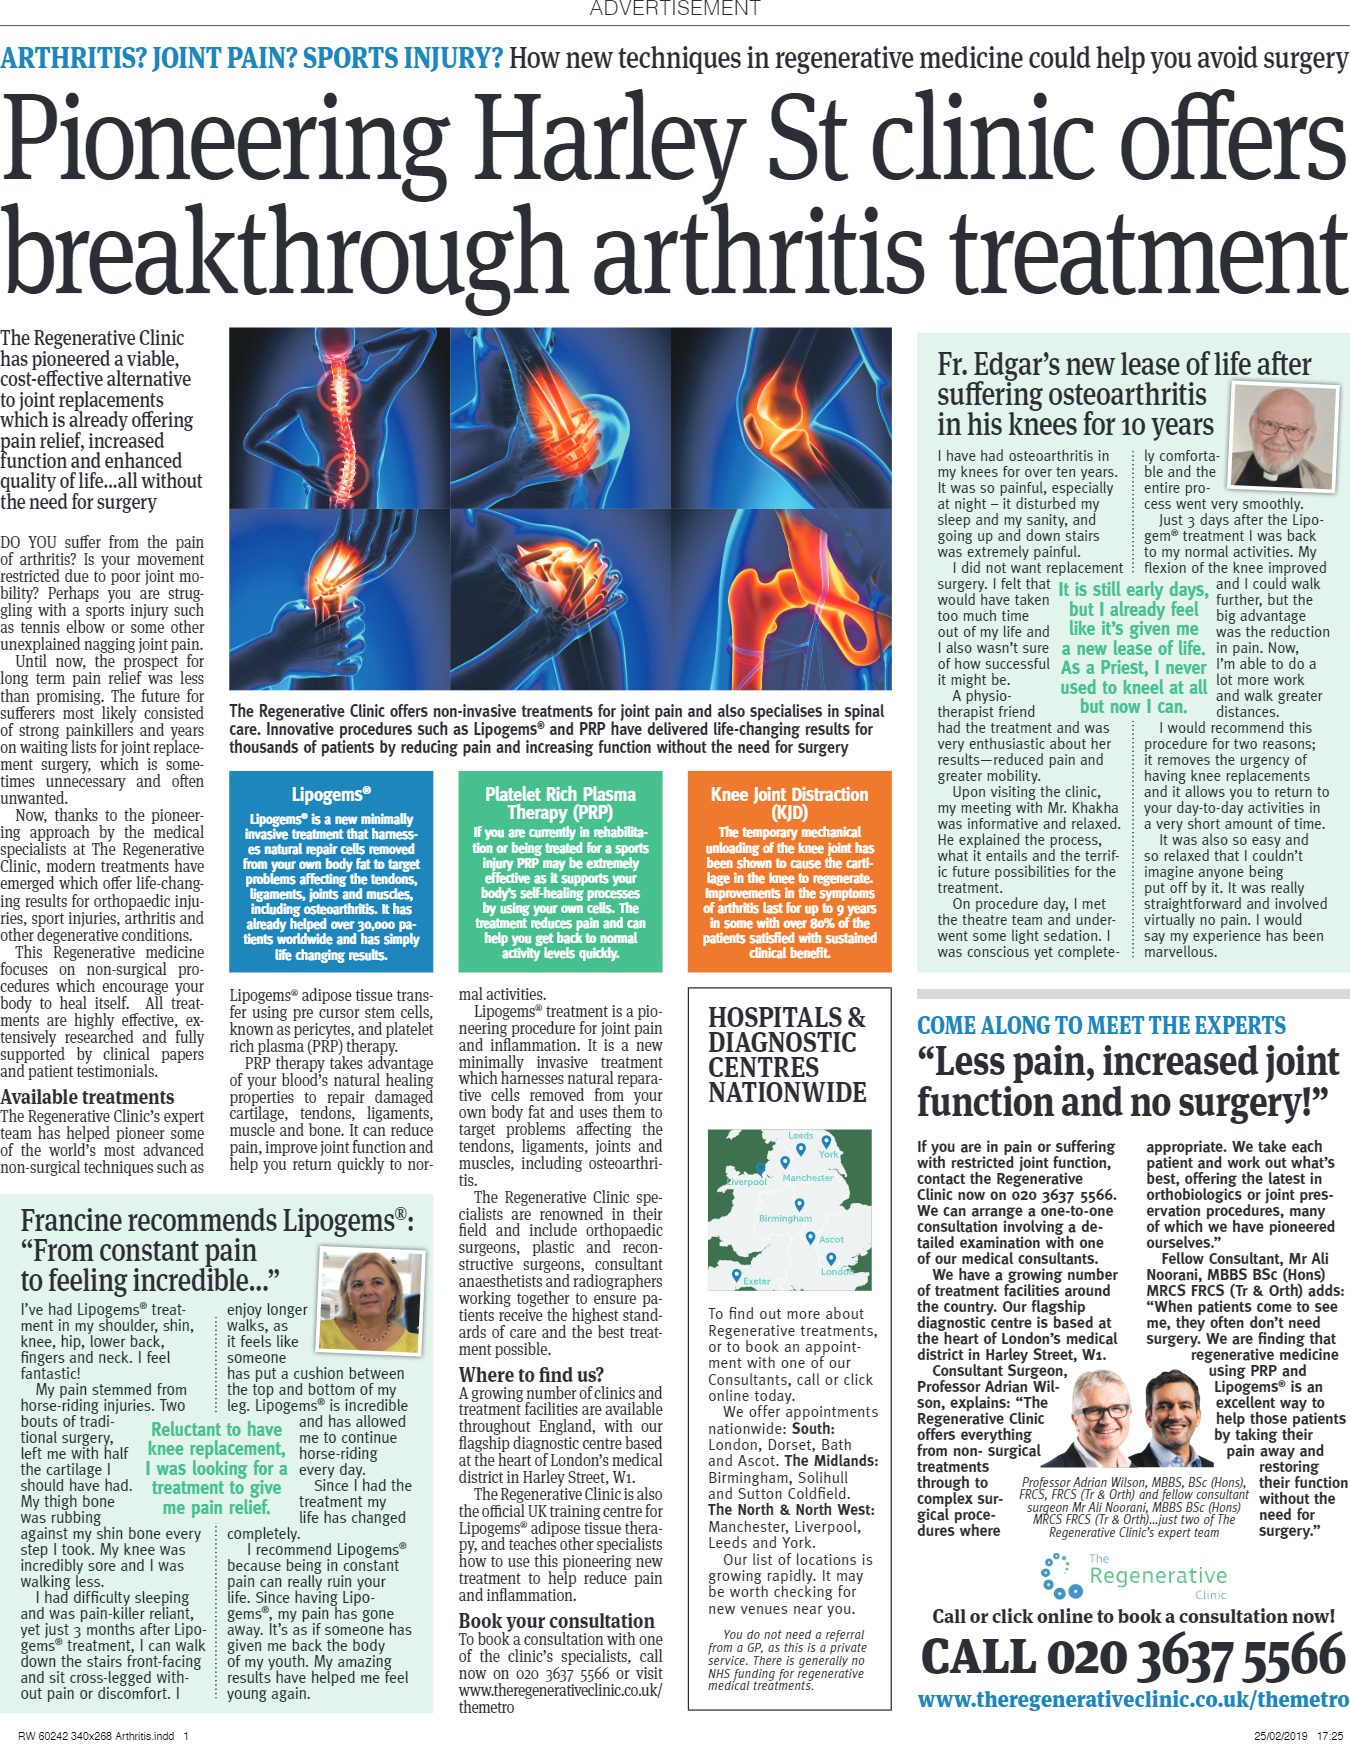 Pioneering Harley St clinic offers breakthrough arthritis treatment